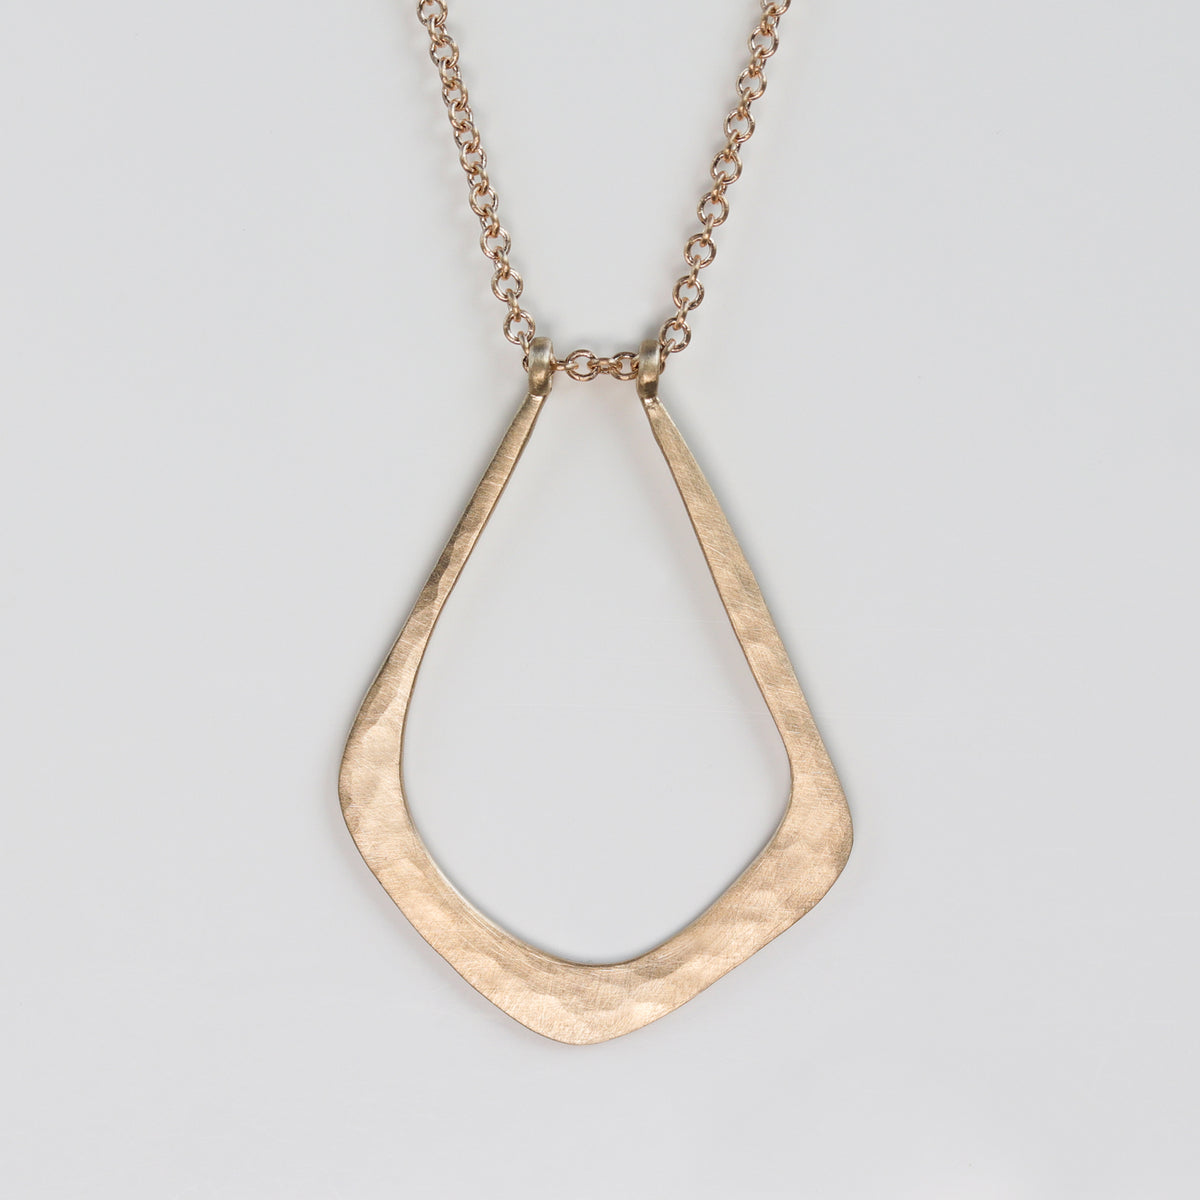 Ring Holder Necklace – Sterling Echoes